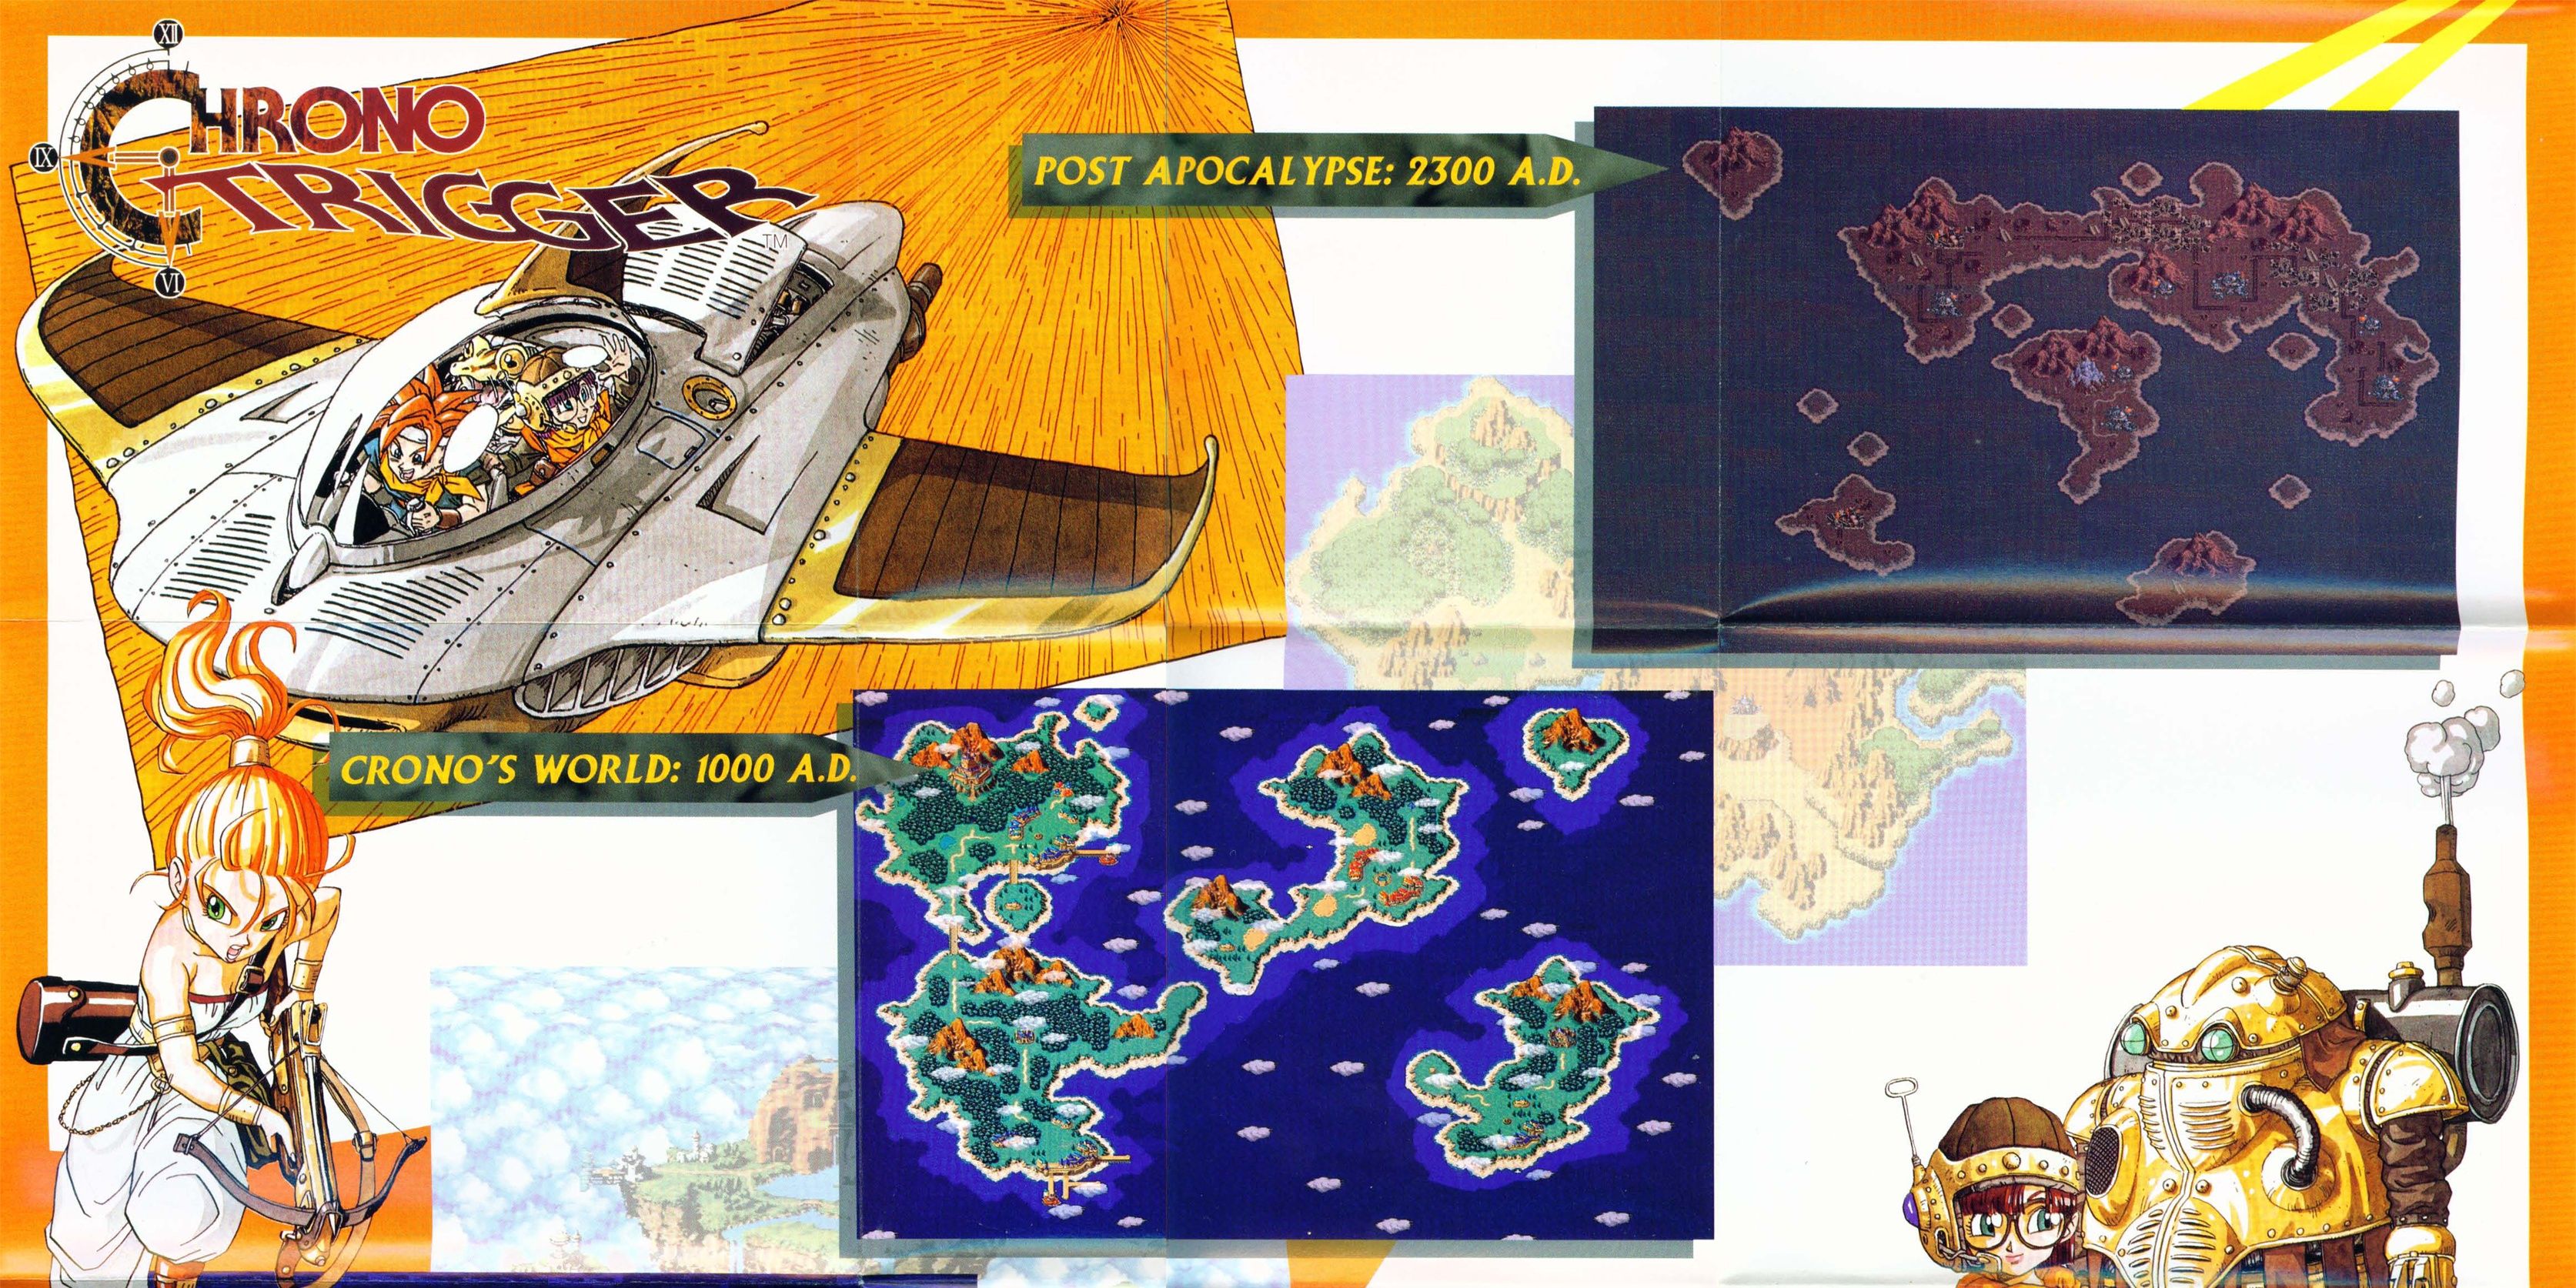 The manual for Chrono Trigger on the SNES.